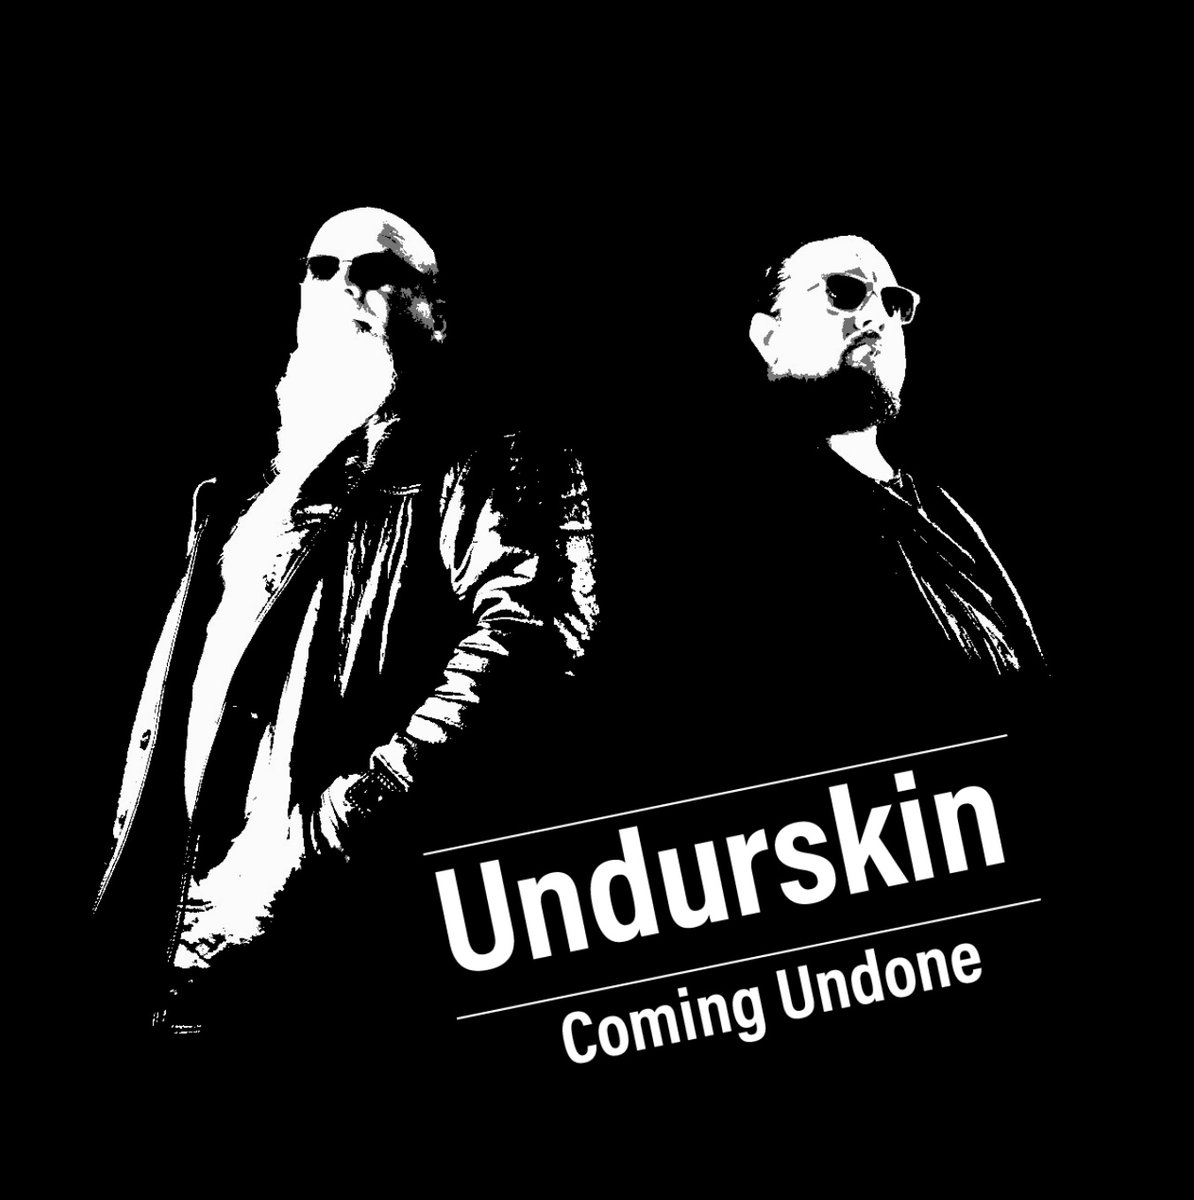 Its tasty and its here on MM Radio with Coming Undone thanks to @undurskin Listen here on mm-radio.com